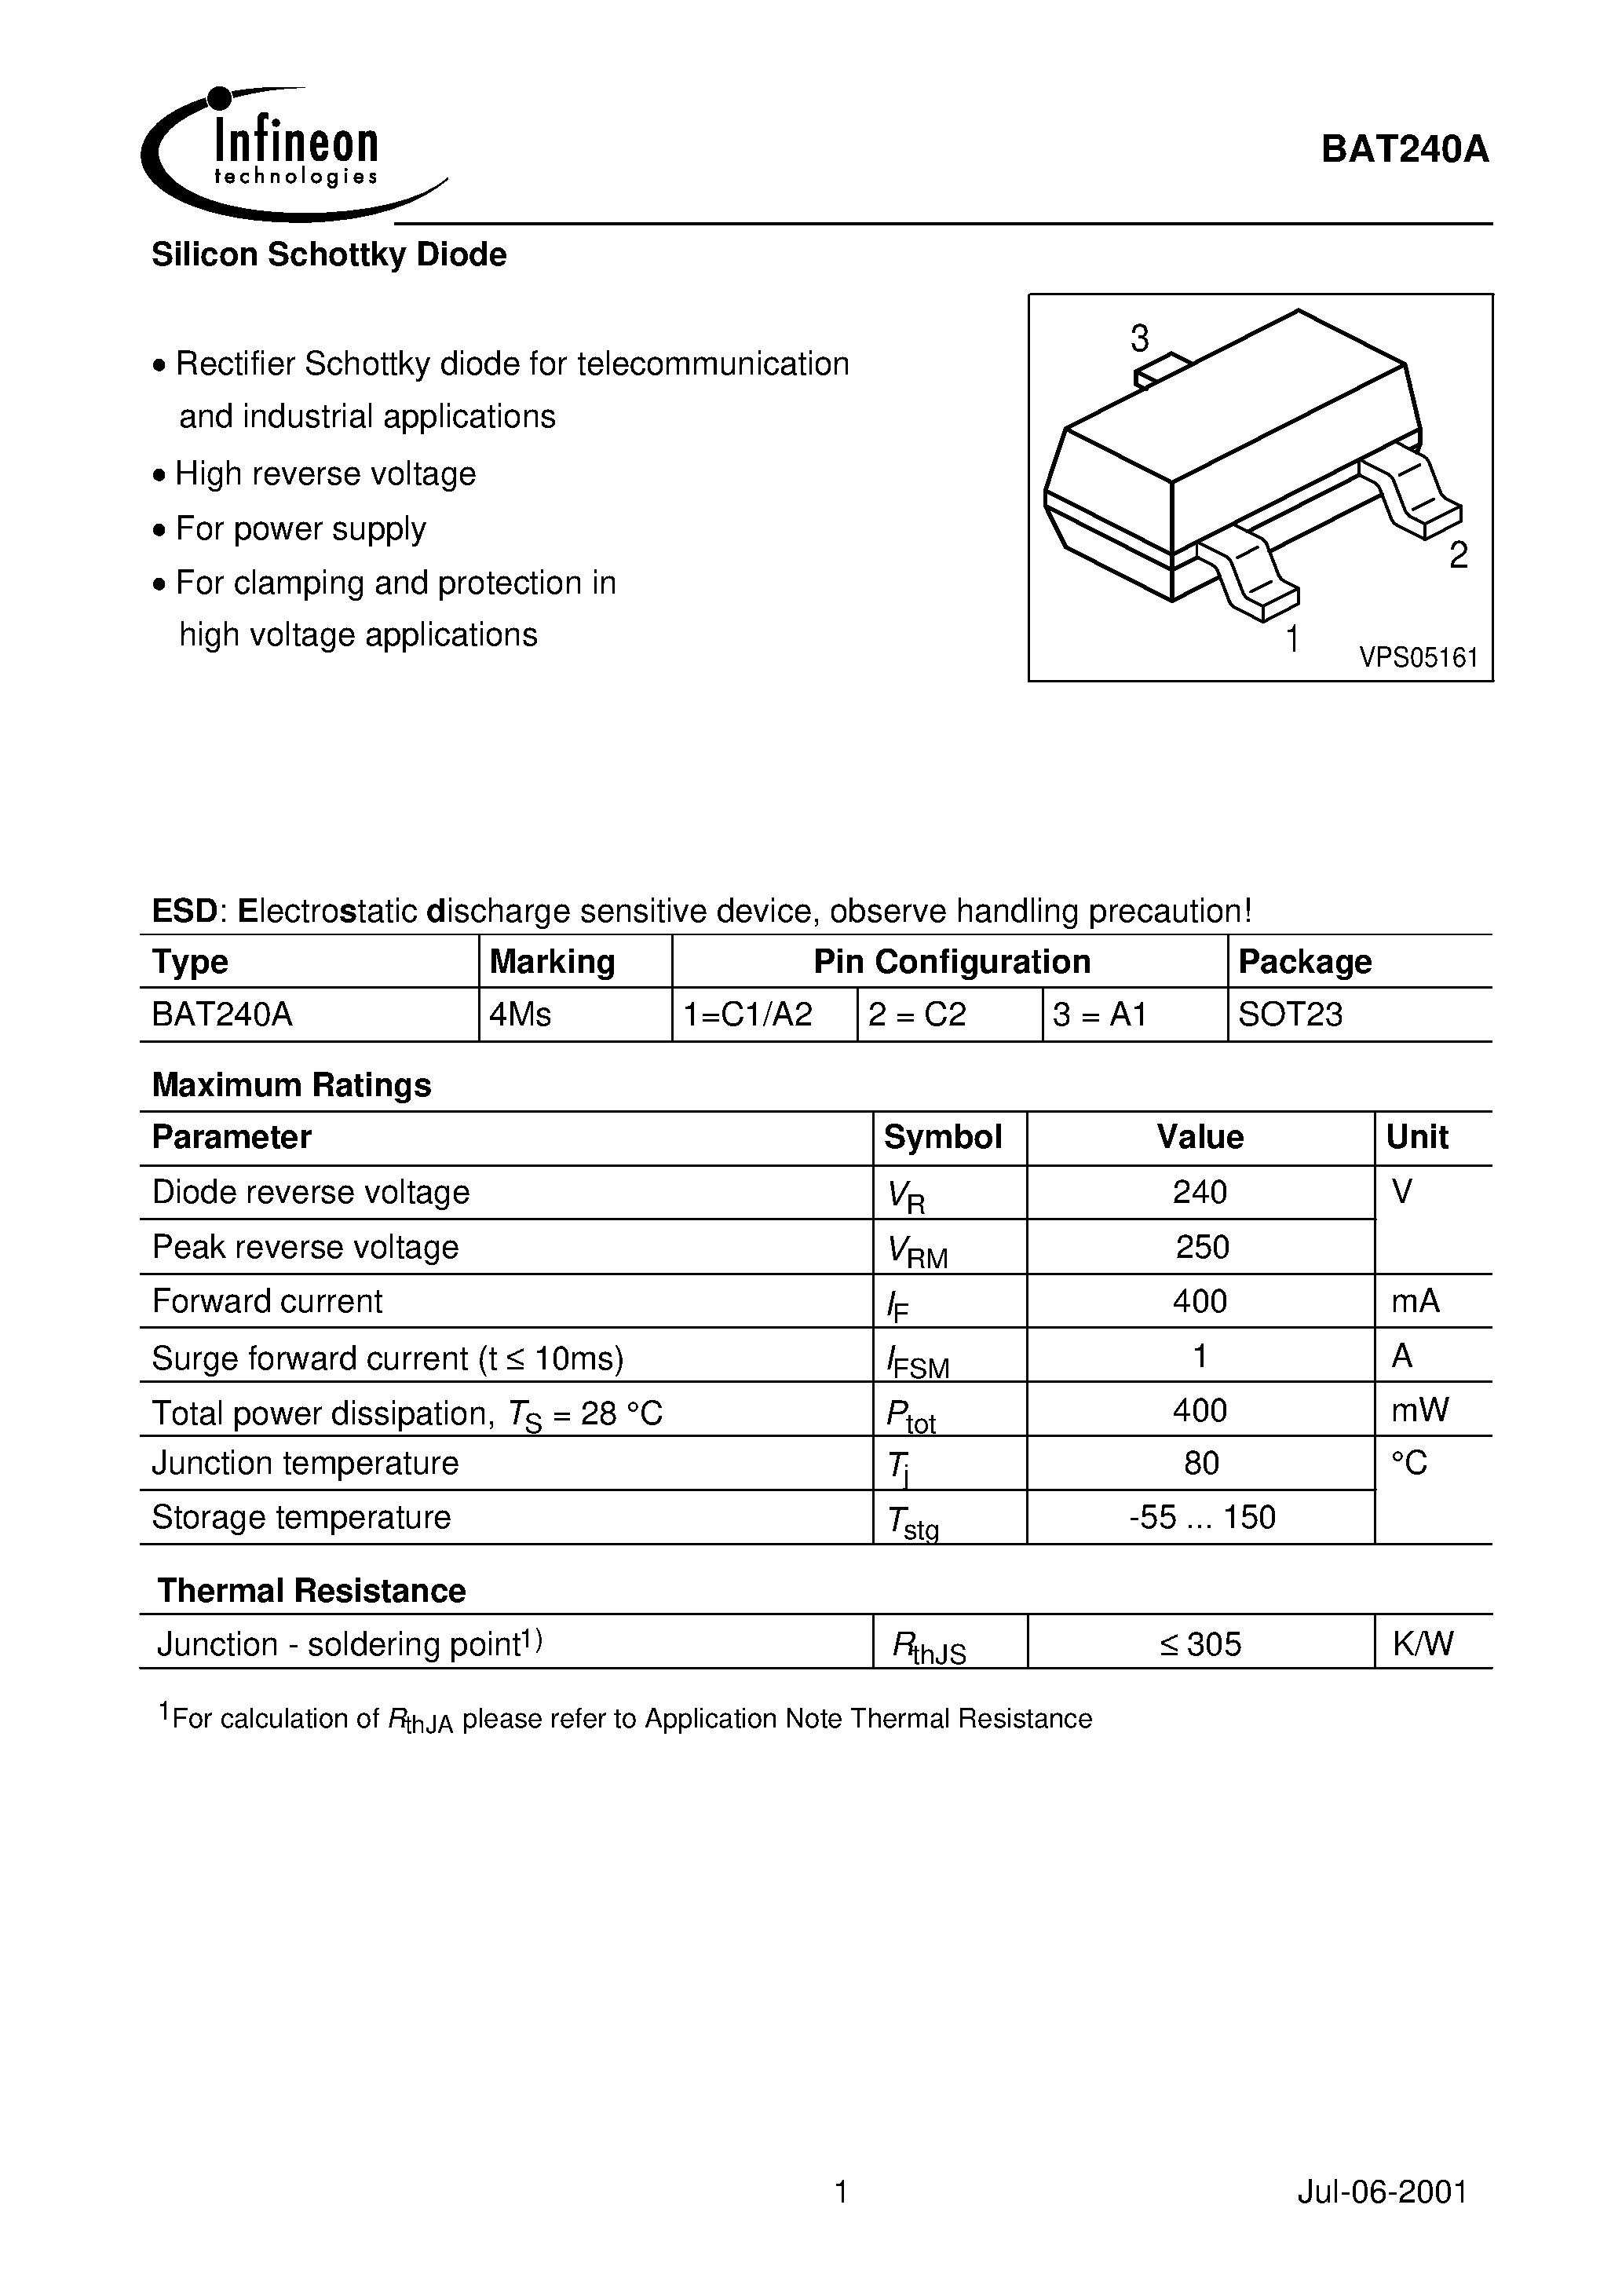 Datasheet BAT240A - Silicon Schottky Diode page 1